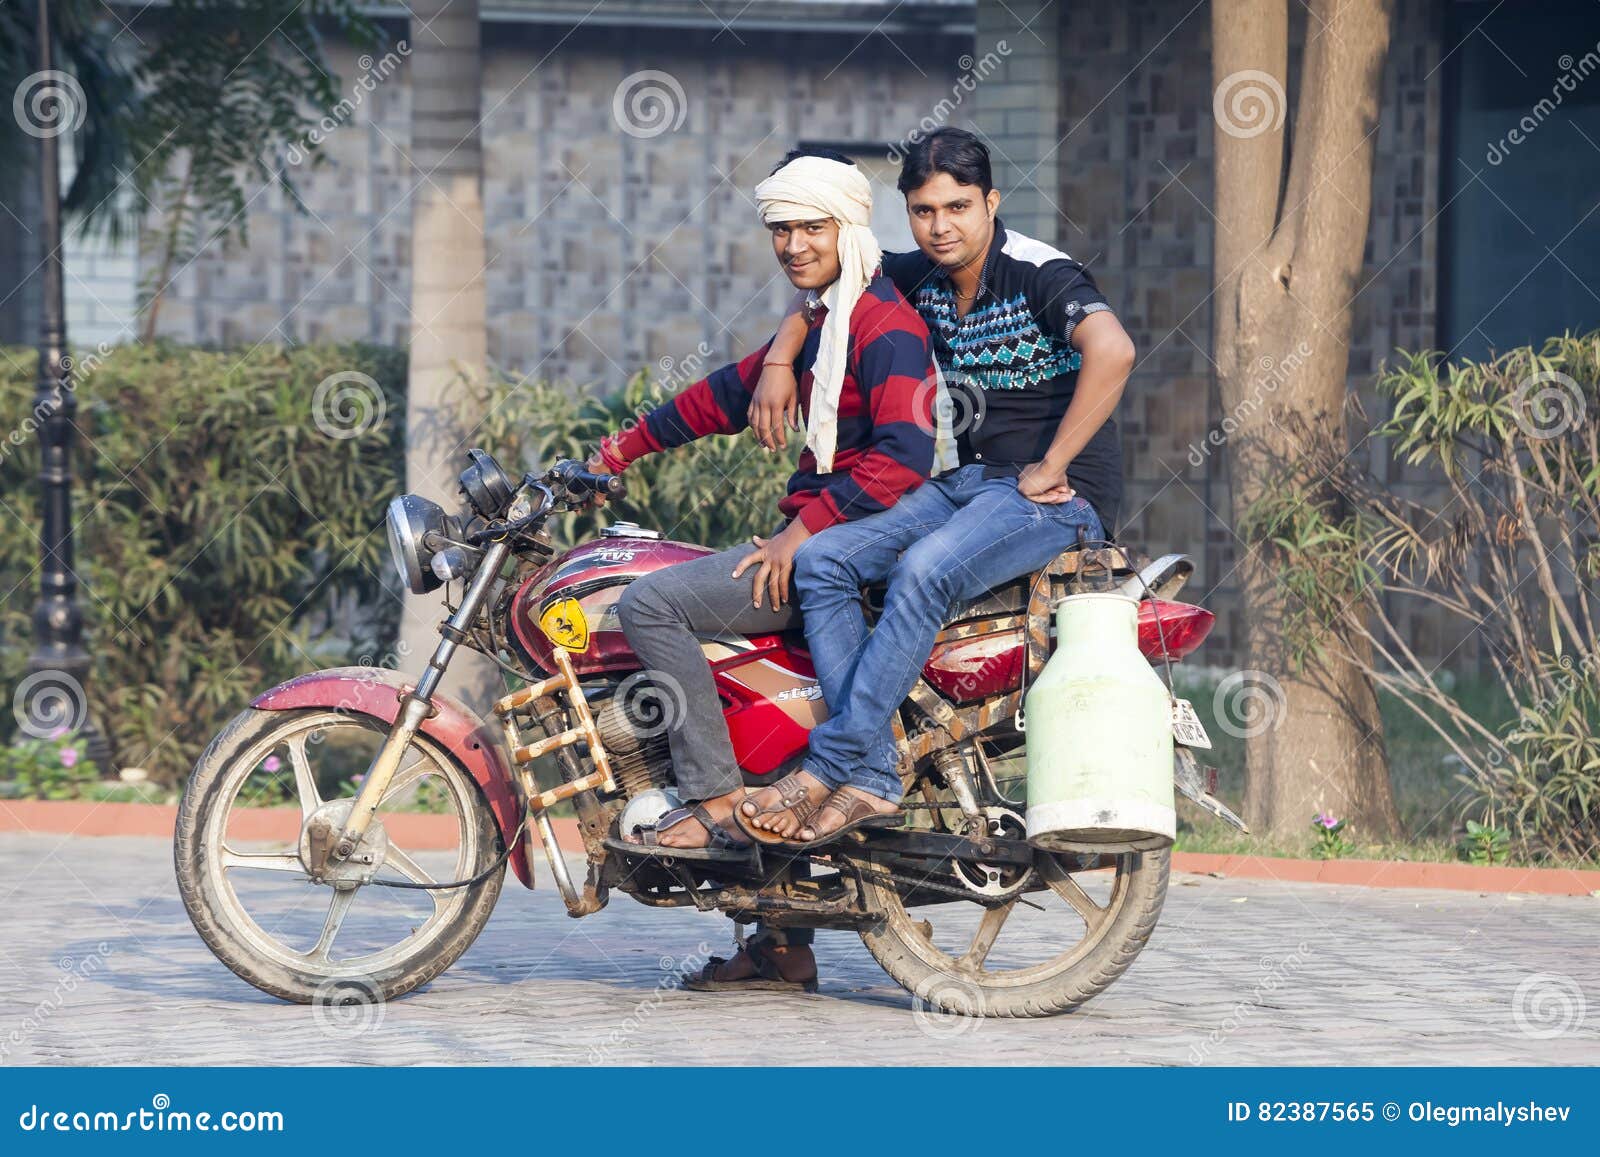 Two Young Indian Man Sit on a Motorcycle Seller of Milk from Milk Cans.India, Vrindavan